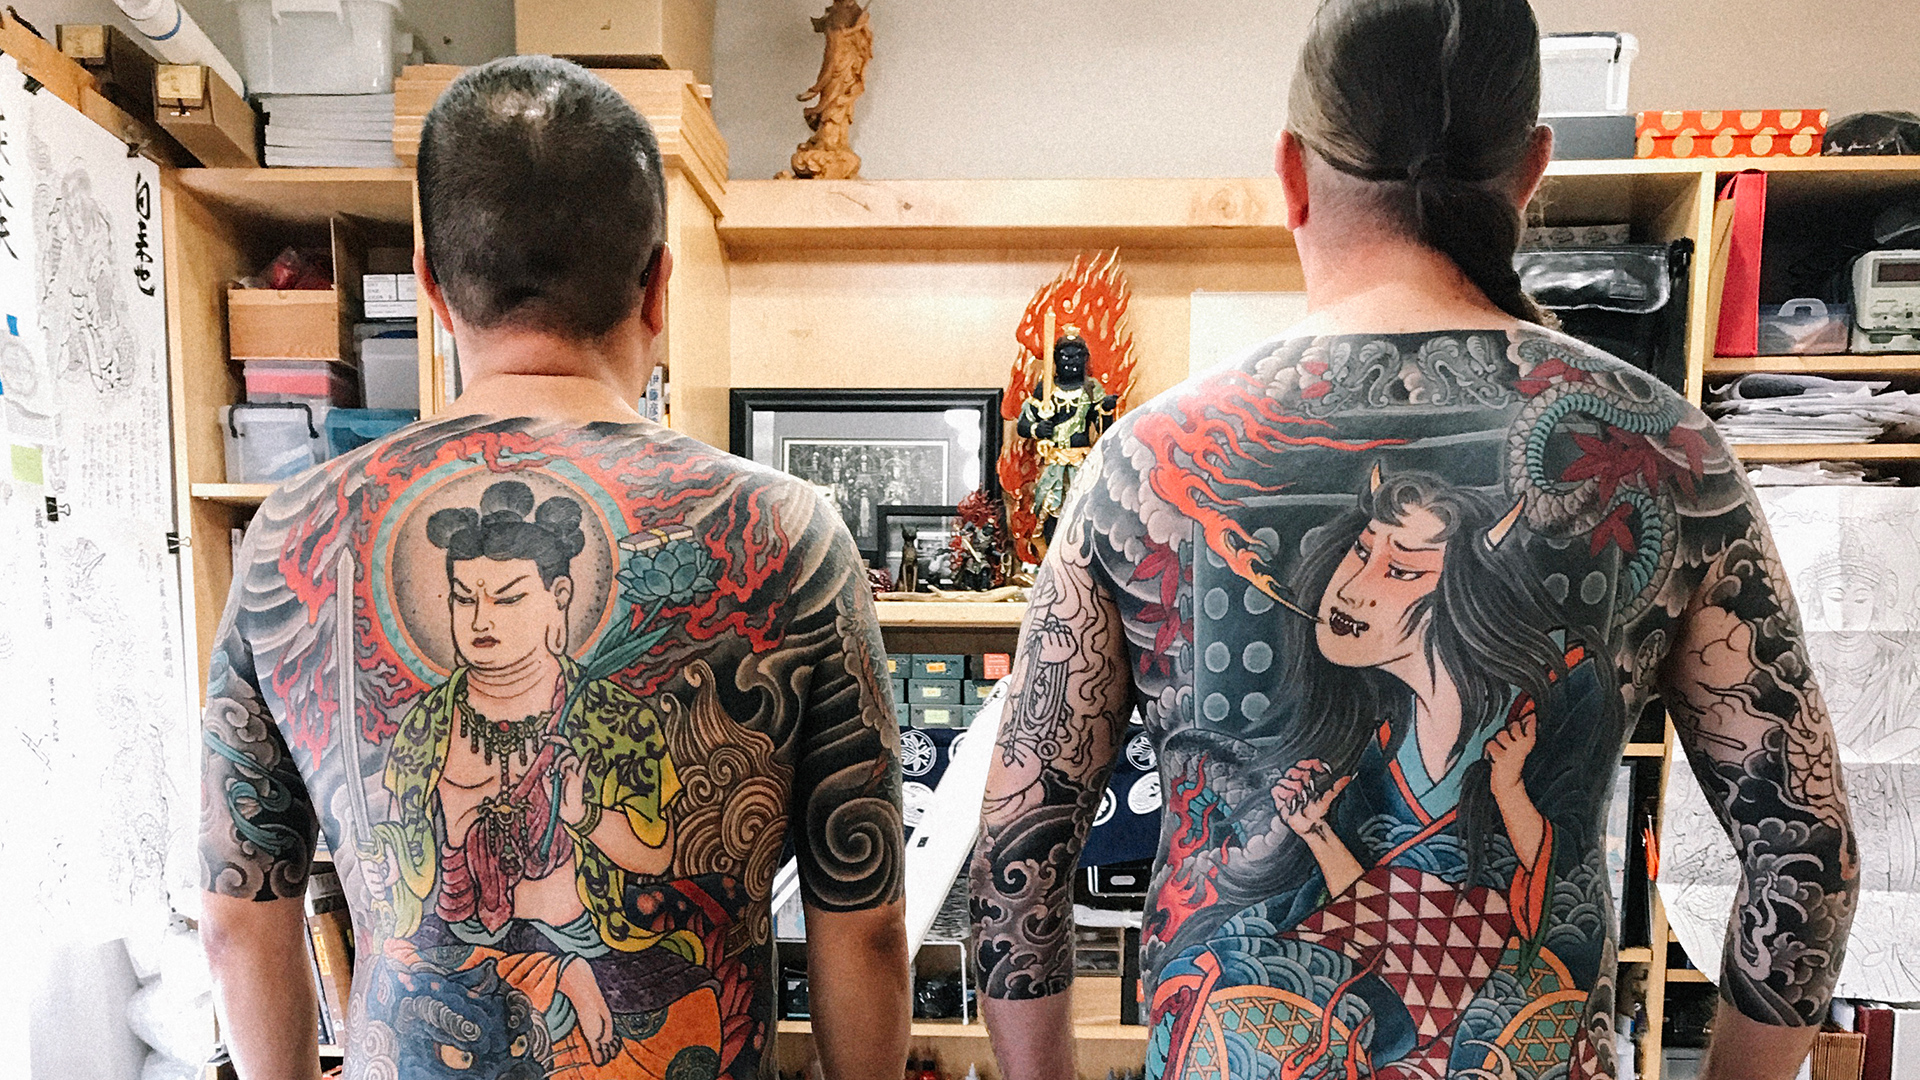 How Two of the Worlds Top Tattoo Artists Stuck a Needle in the Industrys  Secret Dark Side  Increased Abandoned Cart Recoveries 200